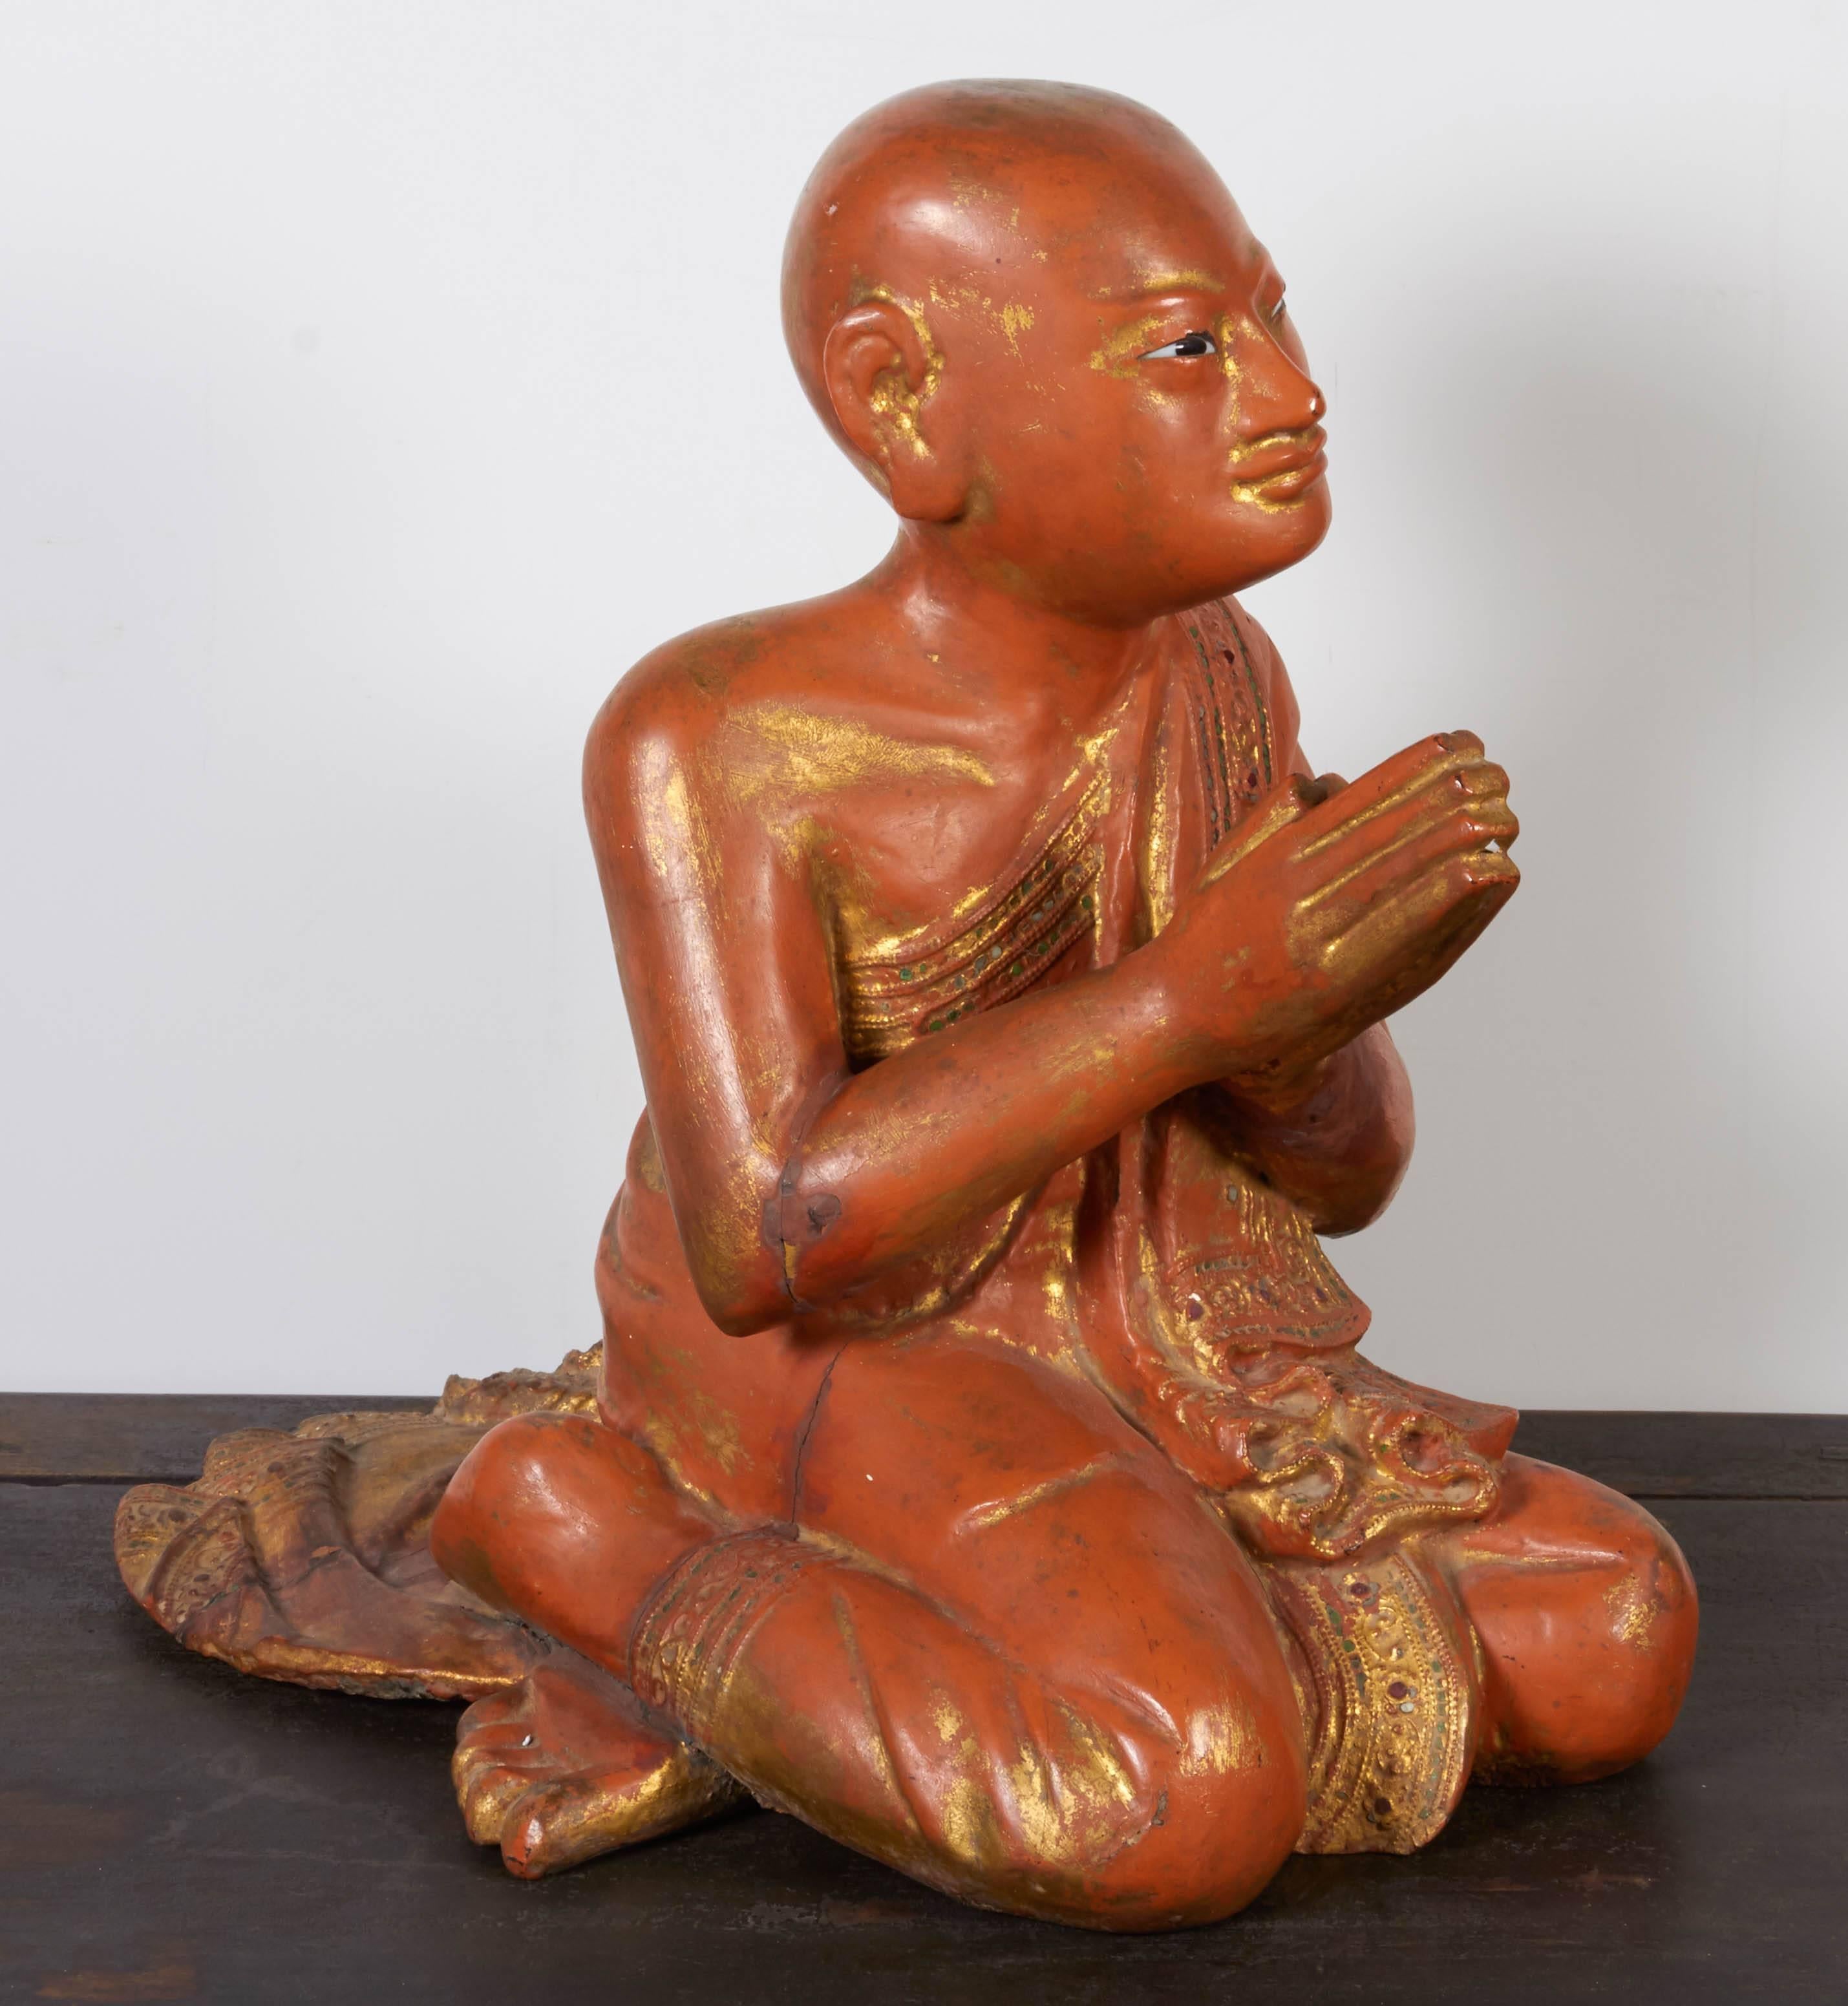 A wonderfully serene and peaceful antique Burmese monk in the Classic praying position. A sweet smile and kind eyes looking upward complete this piece.
BH557.
